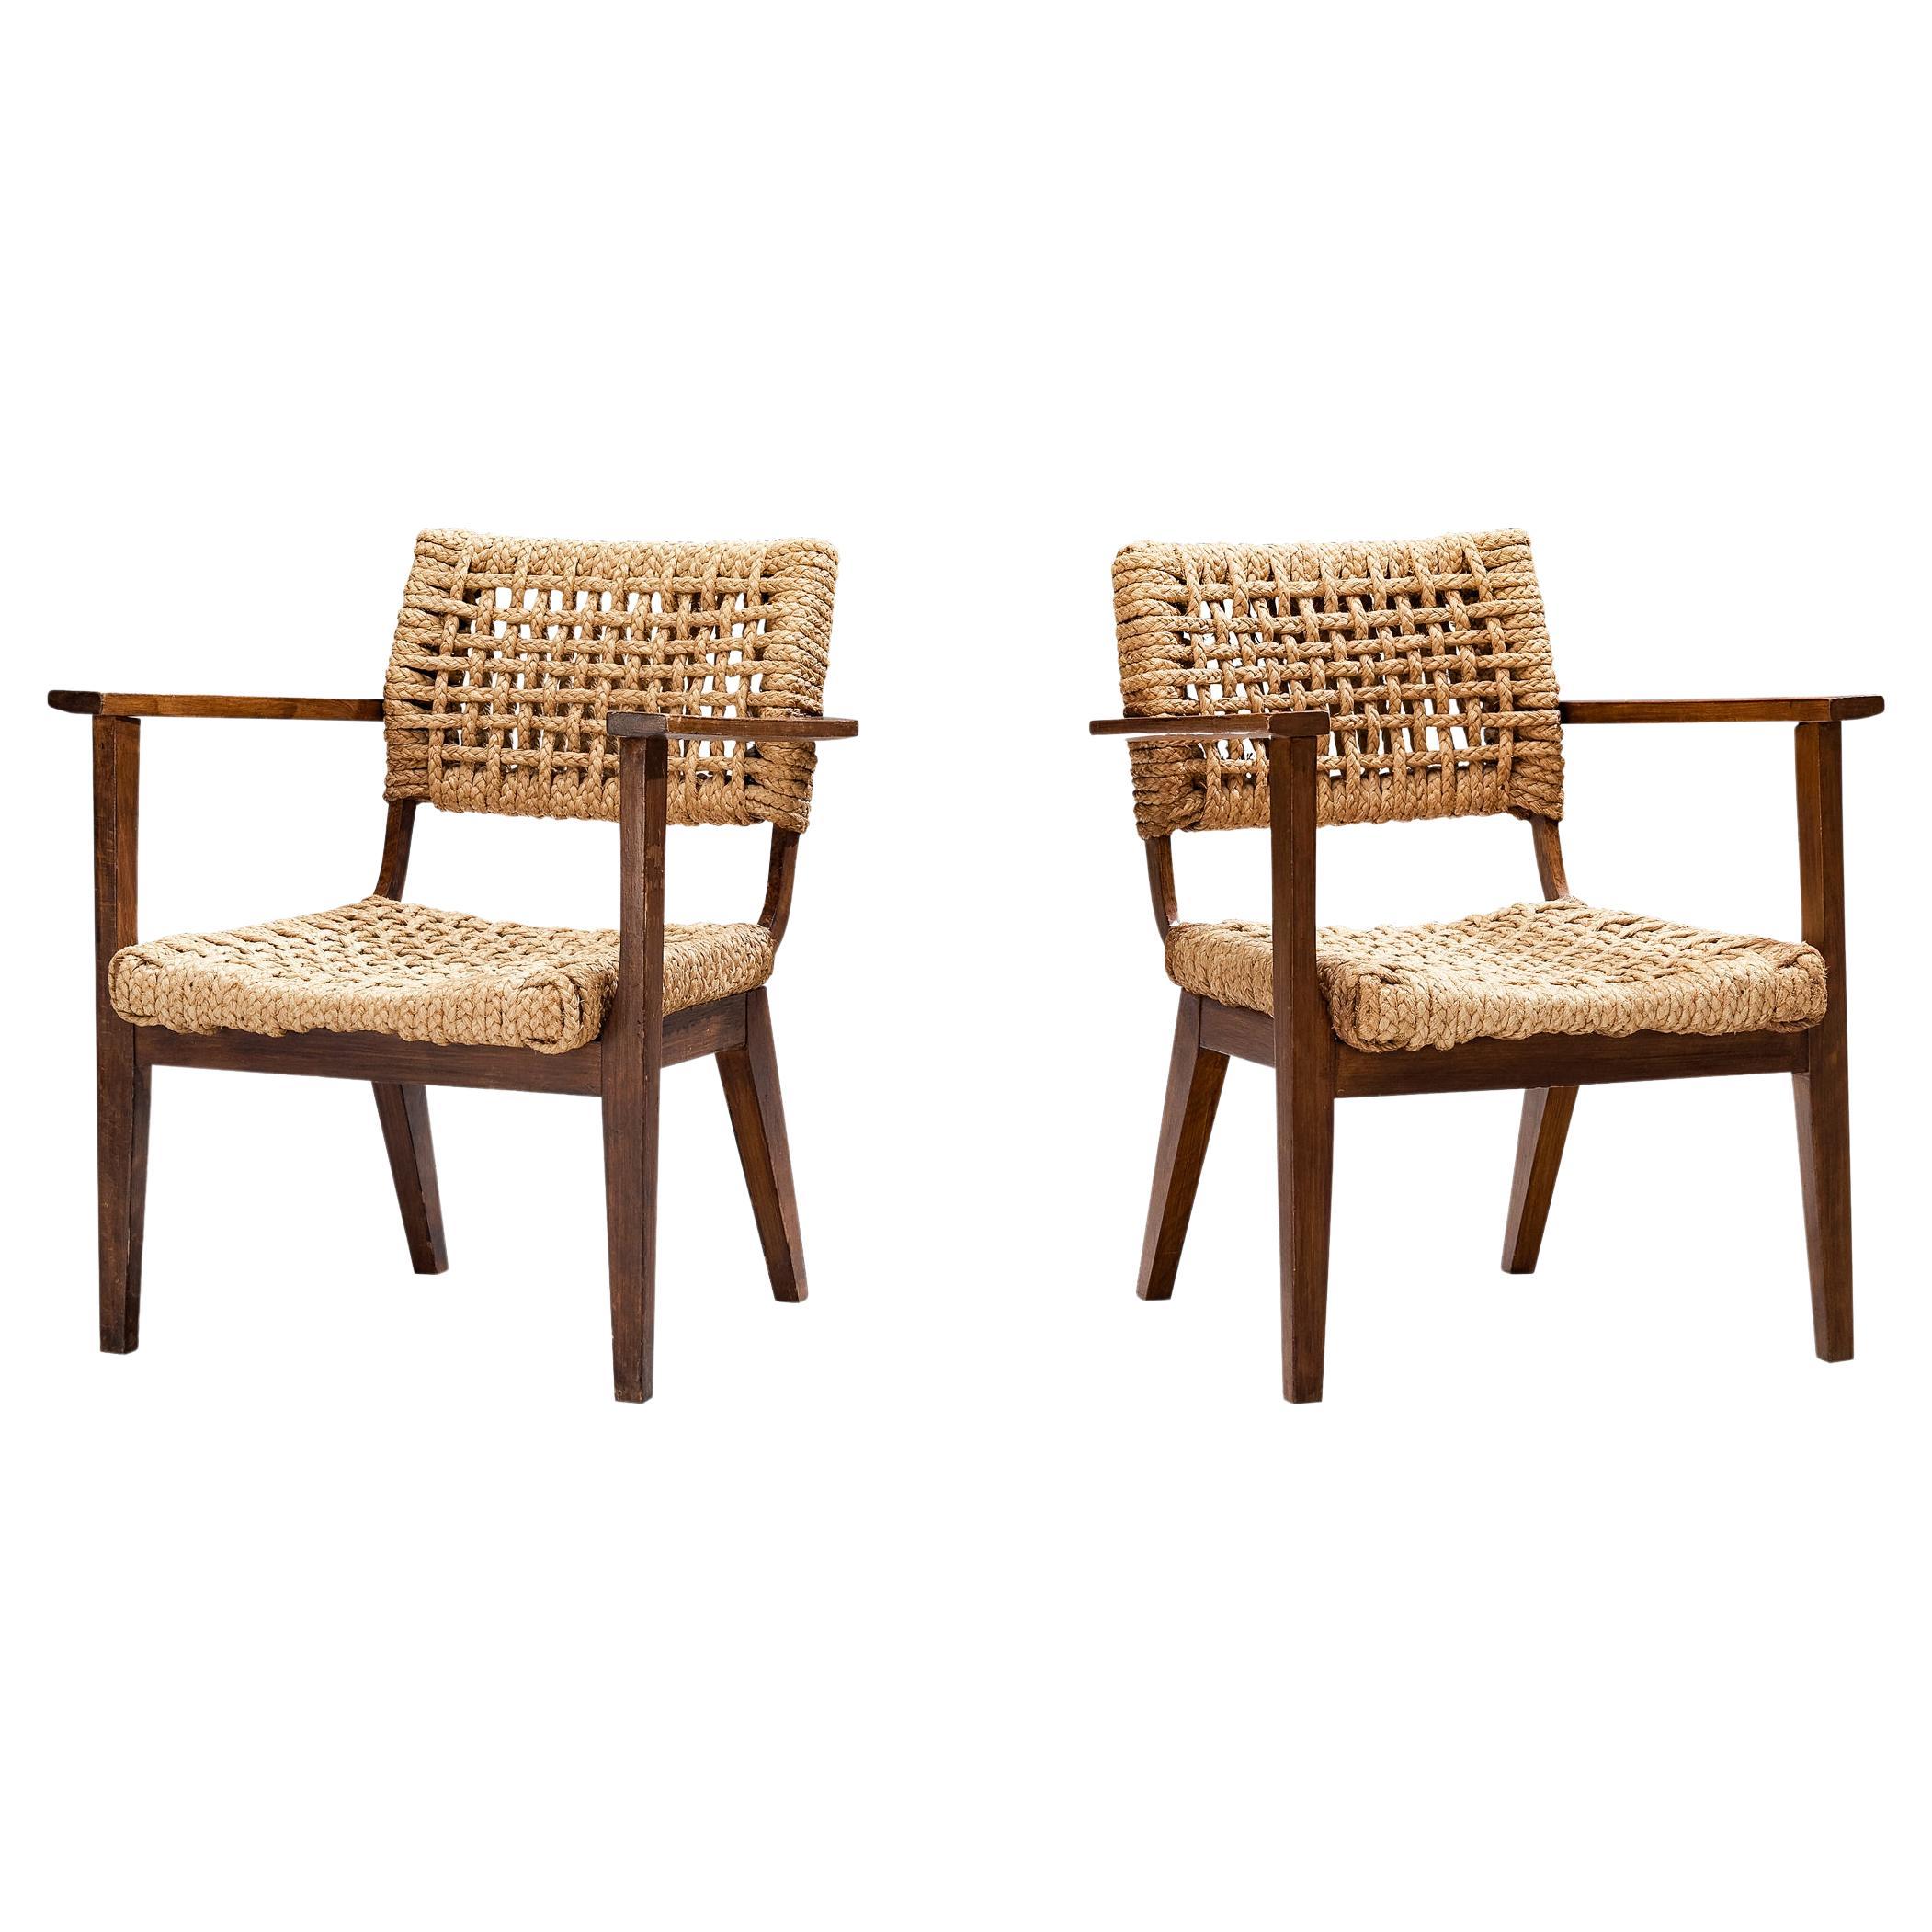 Adrian & Frida Minet for Vibo Pair of Armchairs in Wicker Straw 